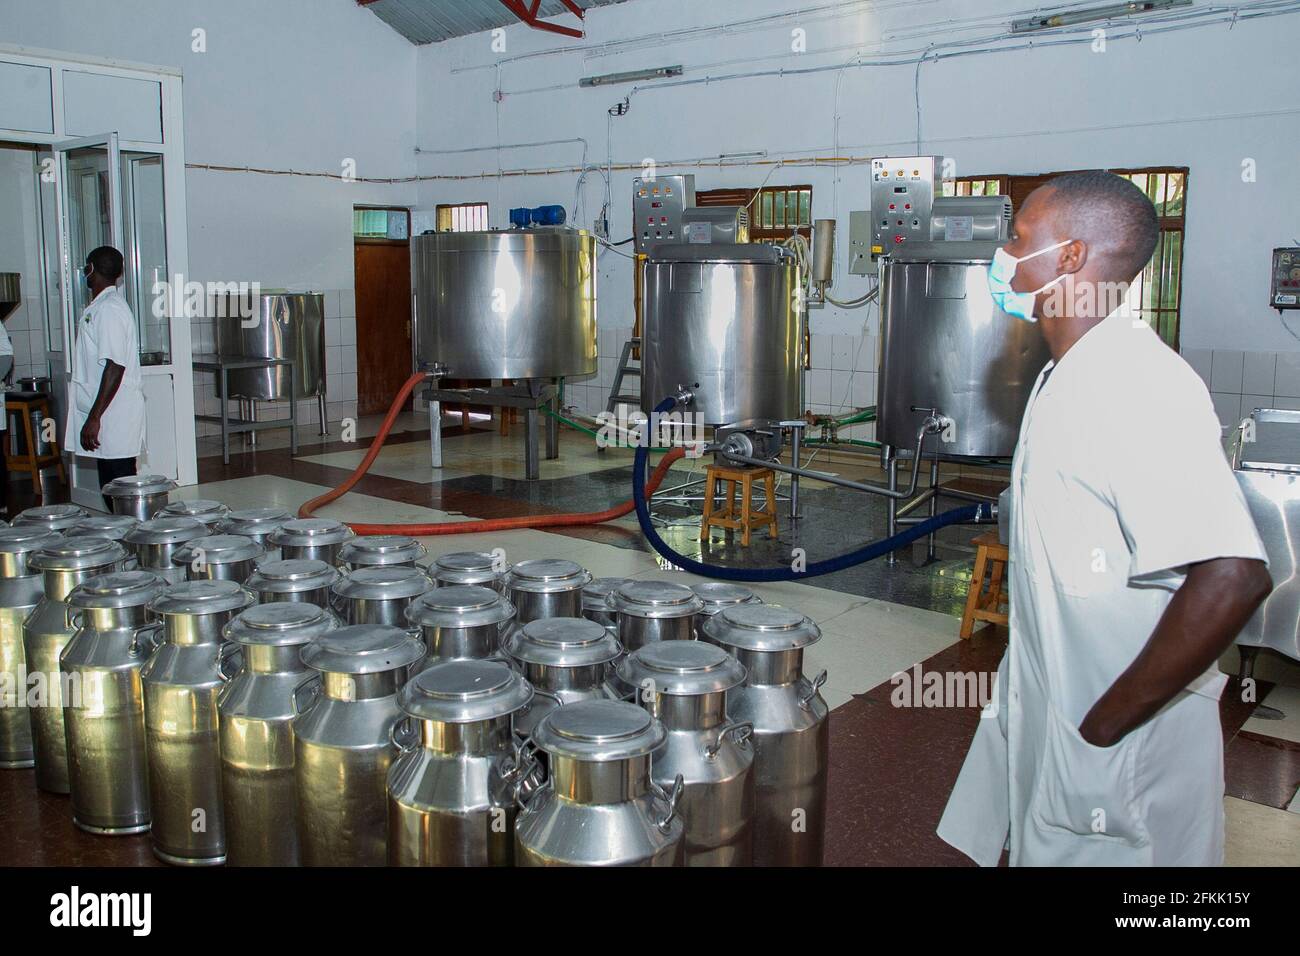 (210502) -- NYANZA, May 2, 2021 (Xinhua) -- Photo taken on April 30, 2021 shows milk processing equipment at Zirakamwa Meza Dairy in Nyanza district, about a two-hour drive from the Rwandan capital city Kigali. TO GO WITH 'Feature: From genocide widow to successful businesswoman -- Rwandan woman walking out of shadow' (photo by Cyril Ndegeya/Xinhua) Stock Photo